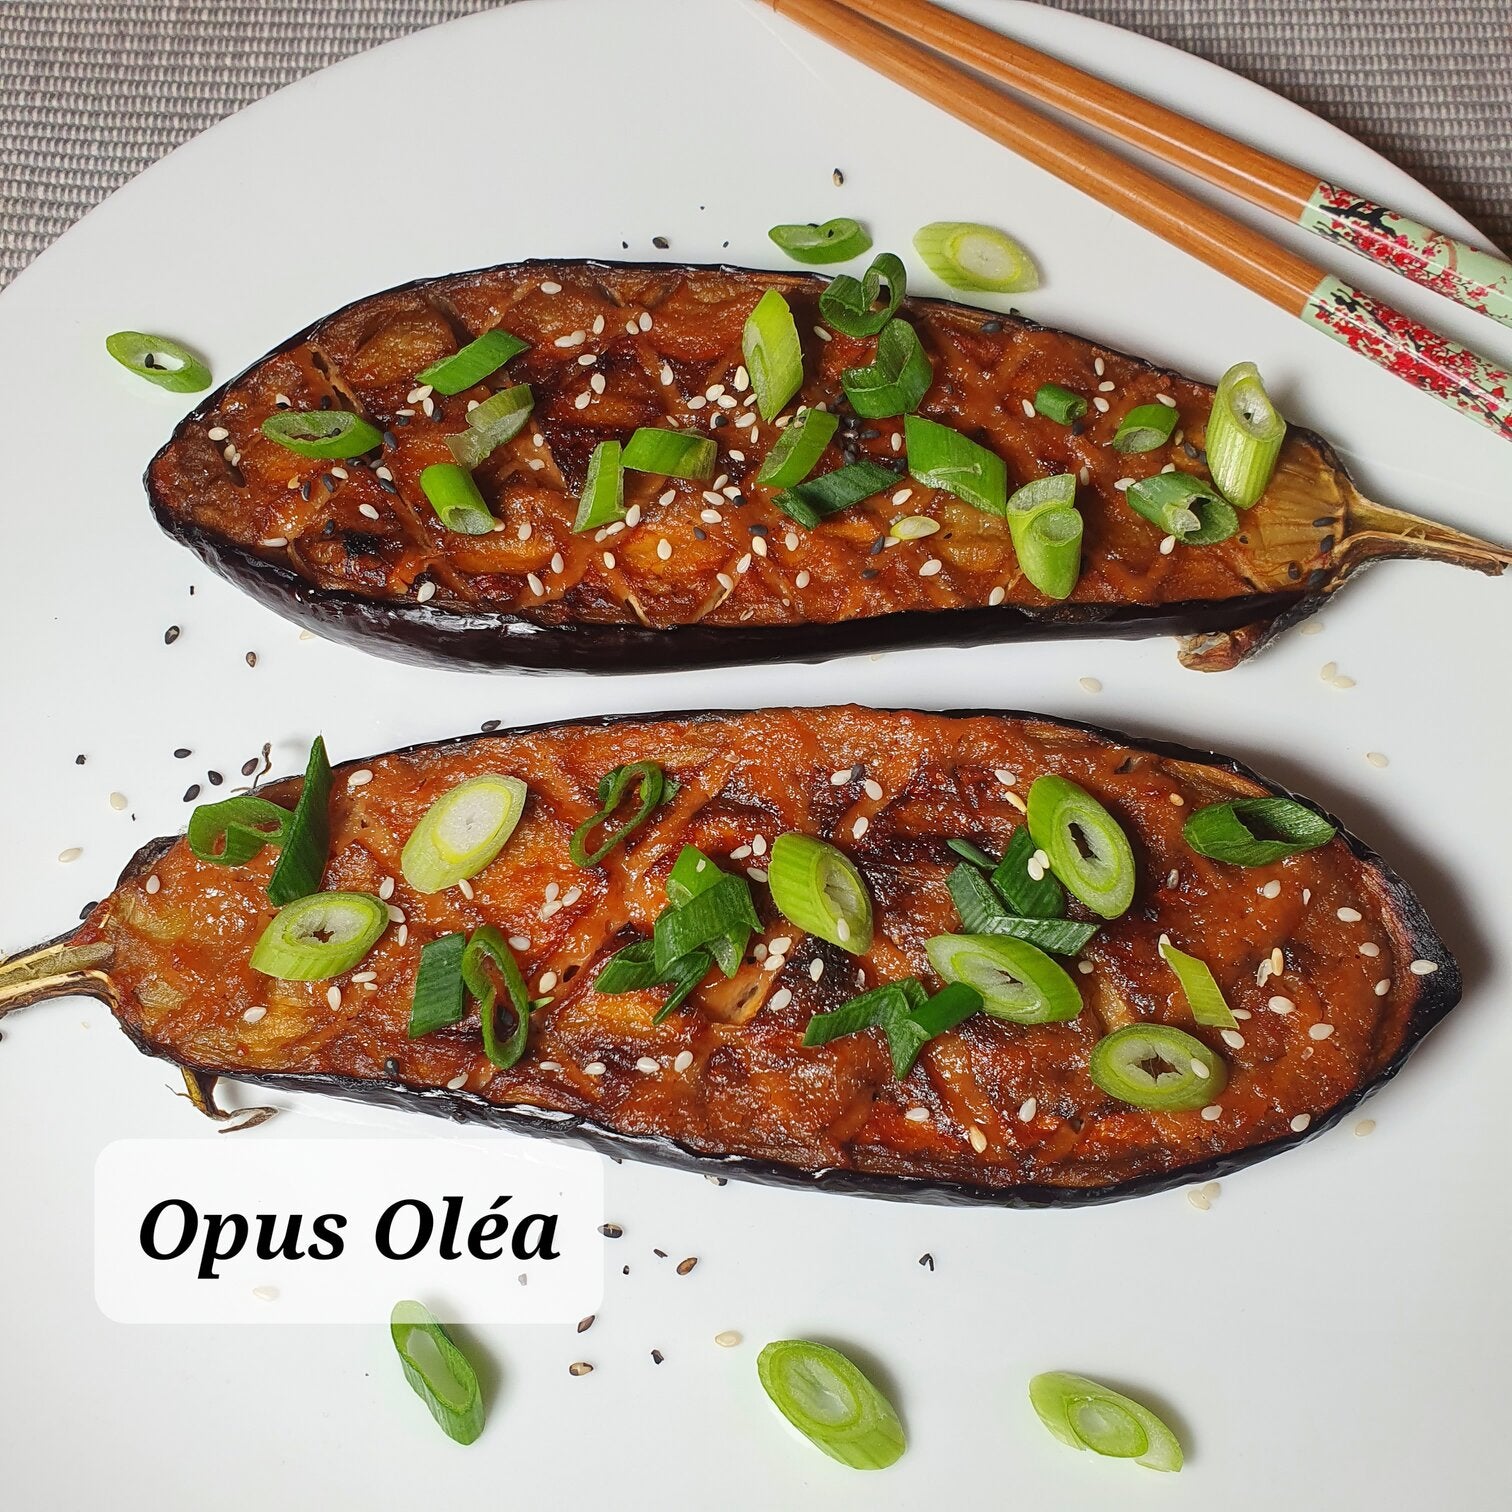 Japanese inspired eggplant with Opus Olea extra virgin olive oil